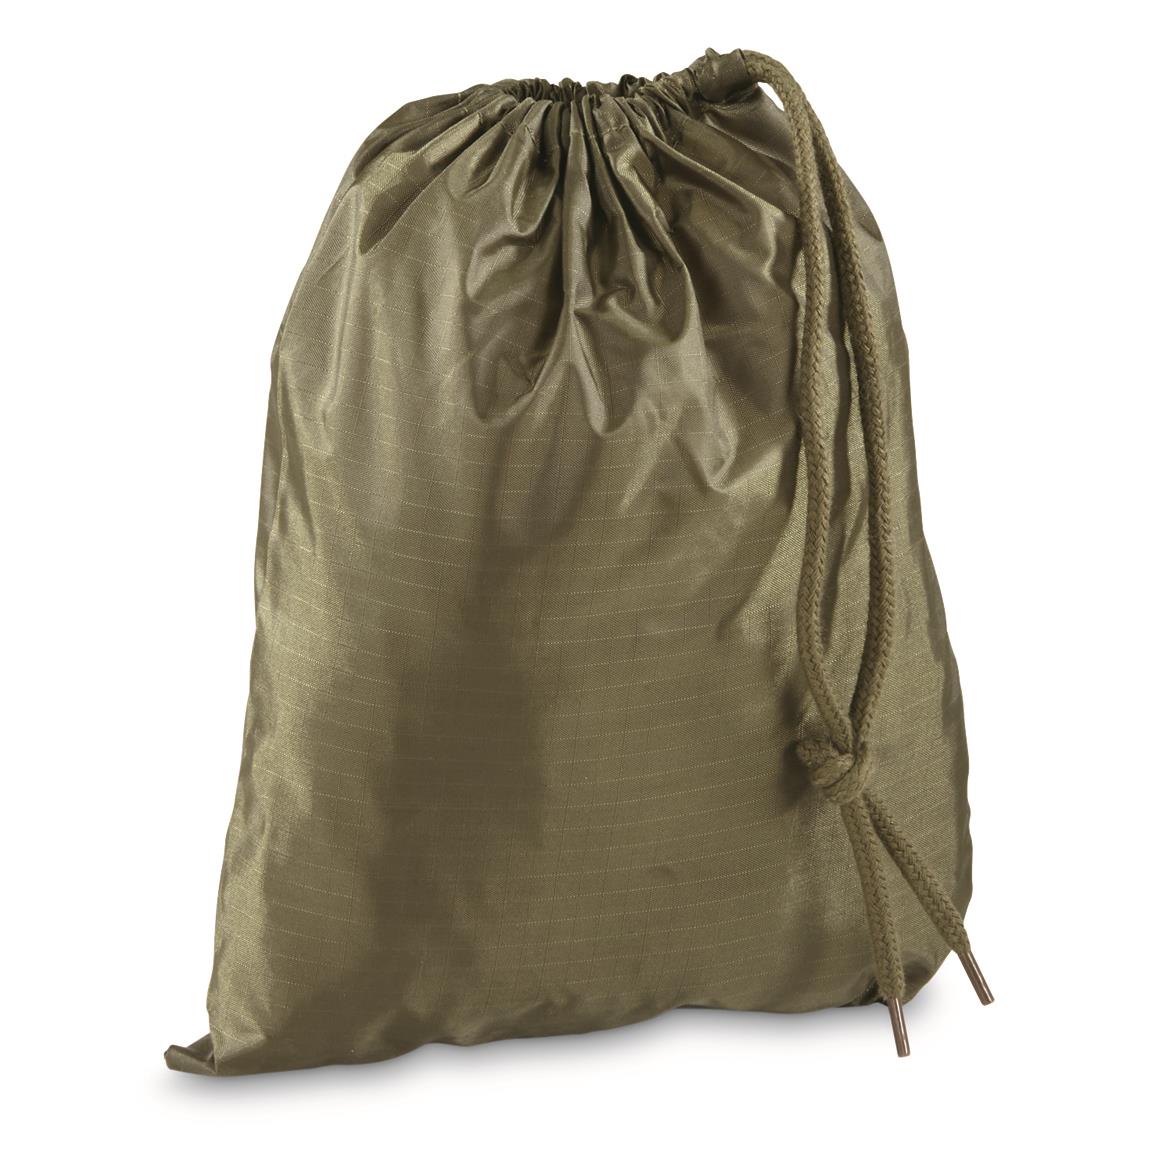 U.S. Municipal Surplus Ditty Bags, 5 Pack, New, Olive Drab